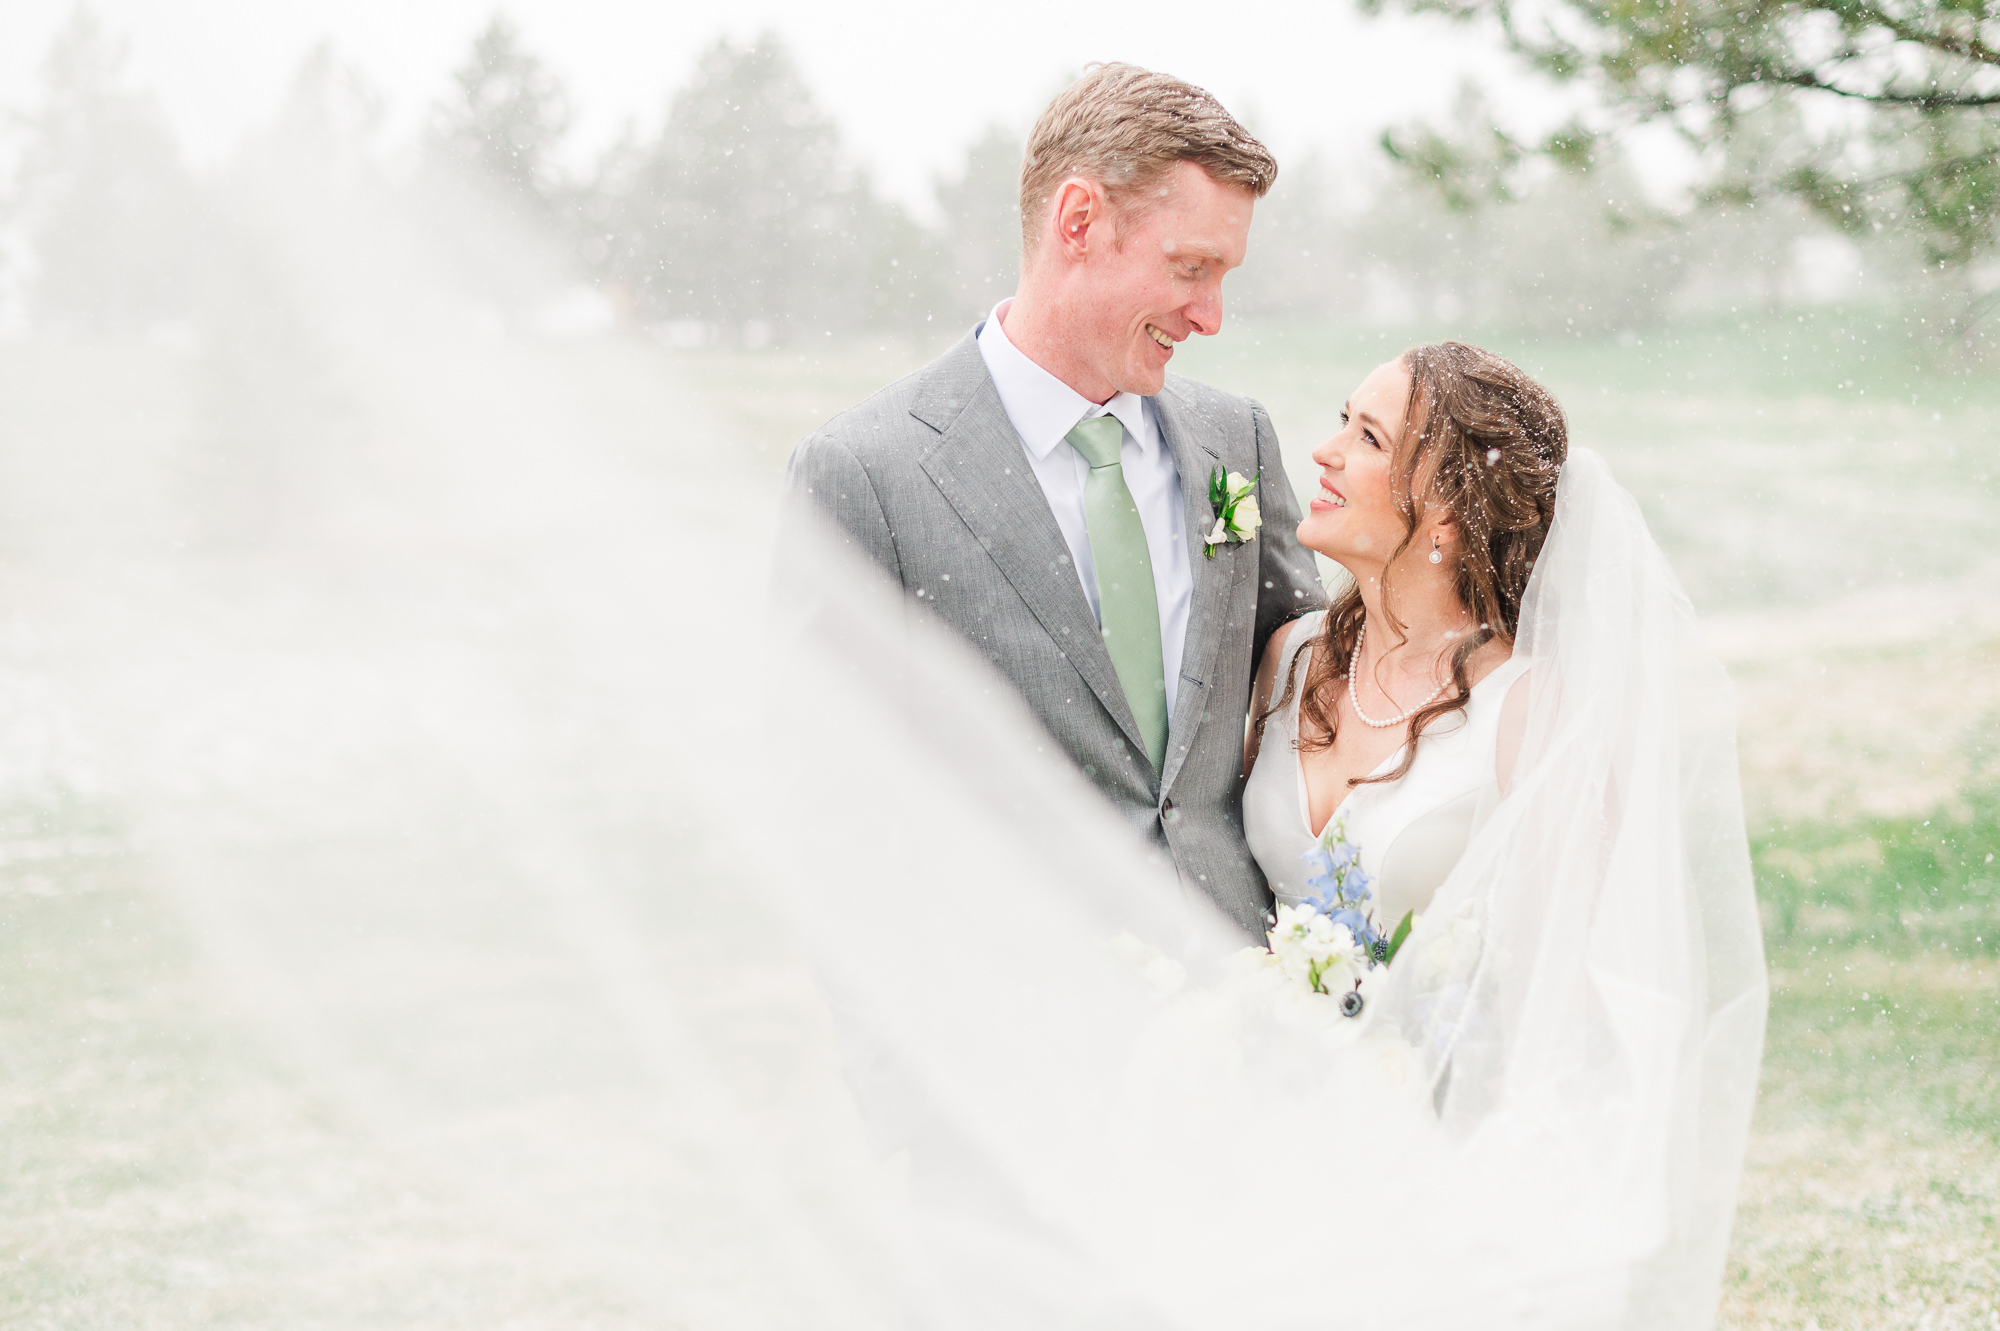 A bride's long veil comes toward us as she looks at her groom outside on their snowy wedding day.